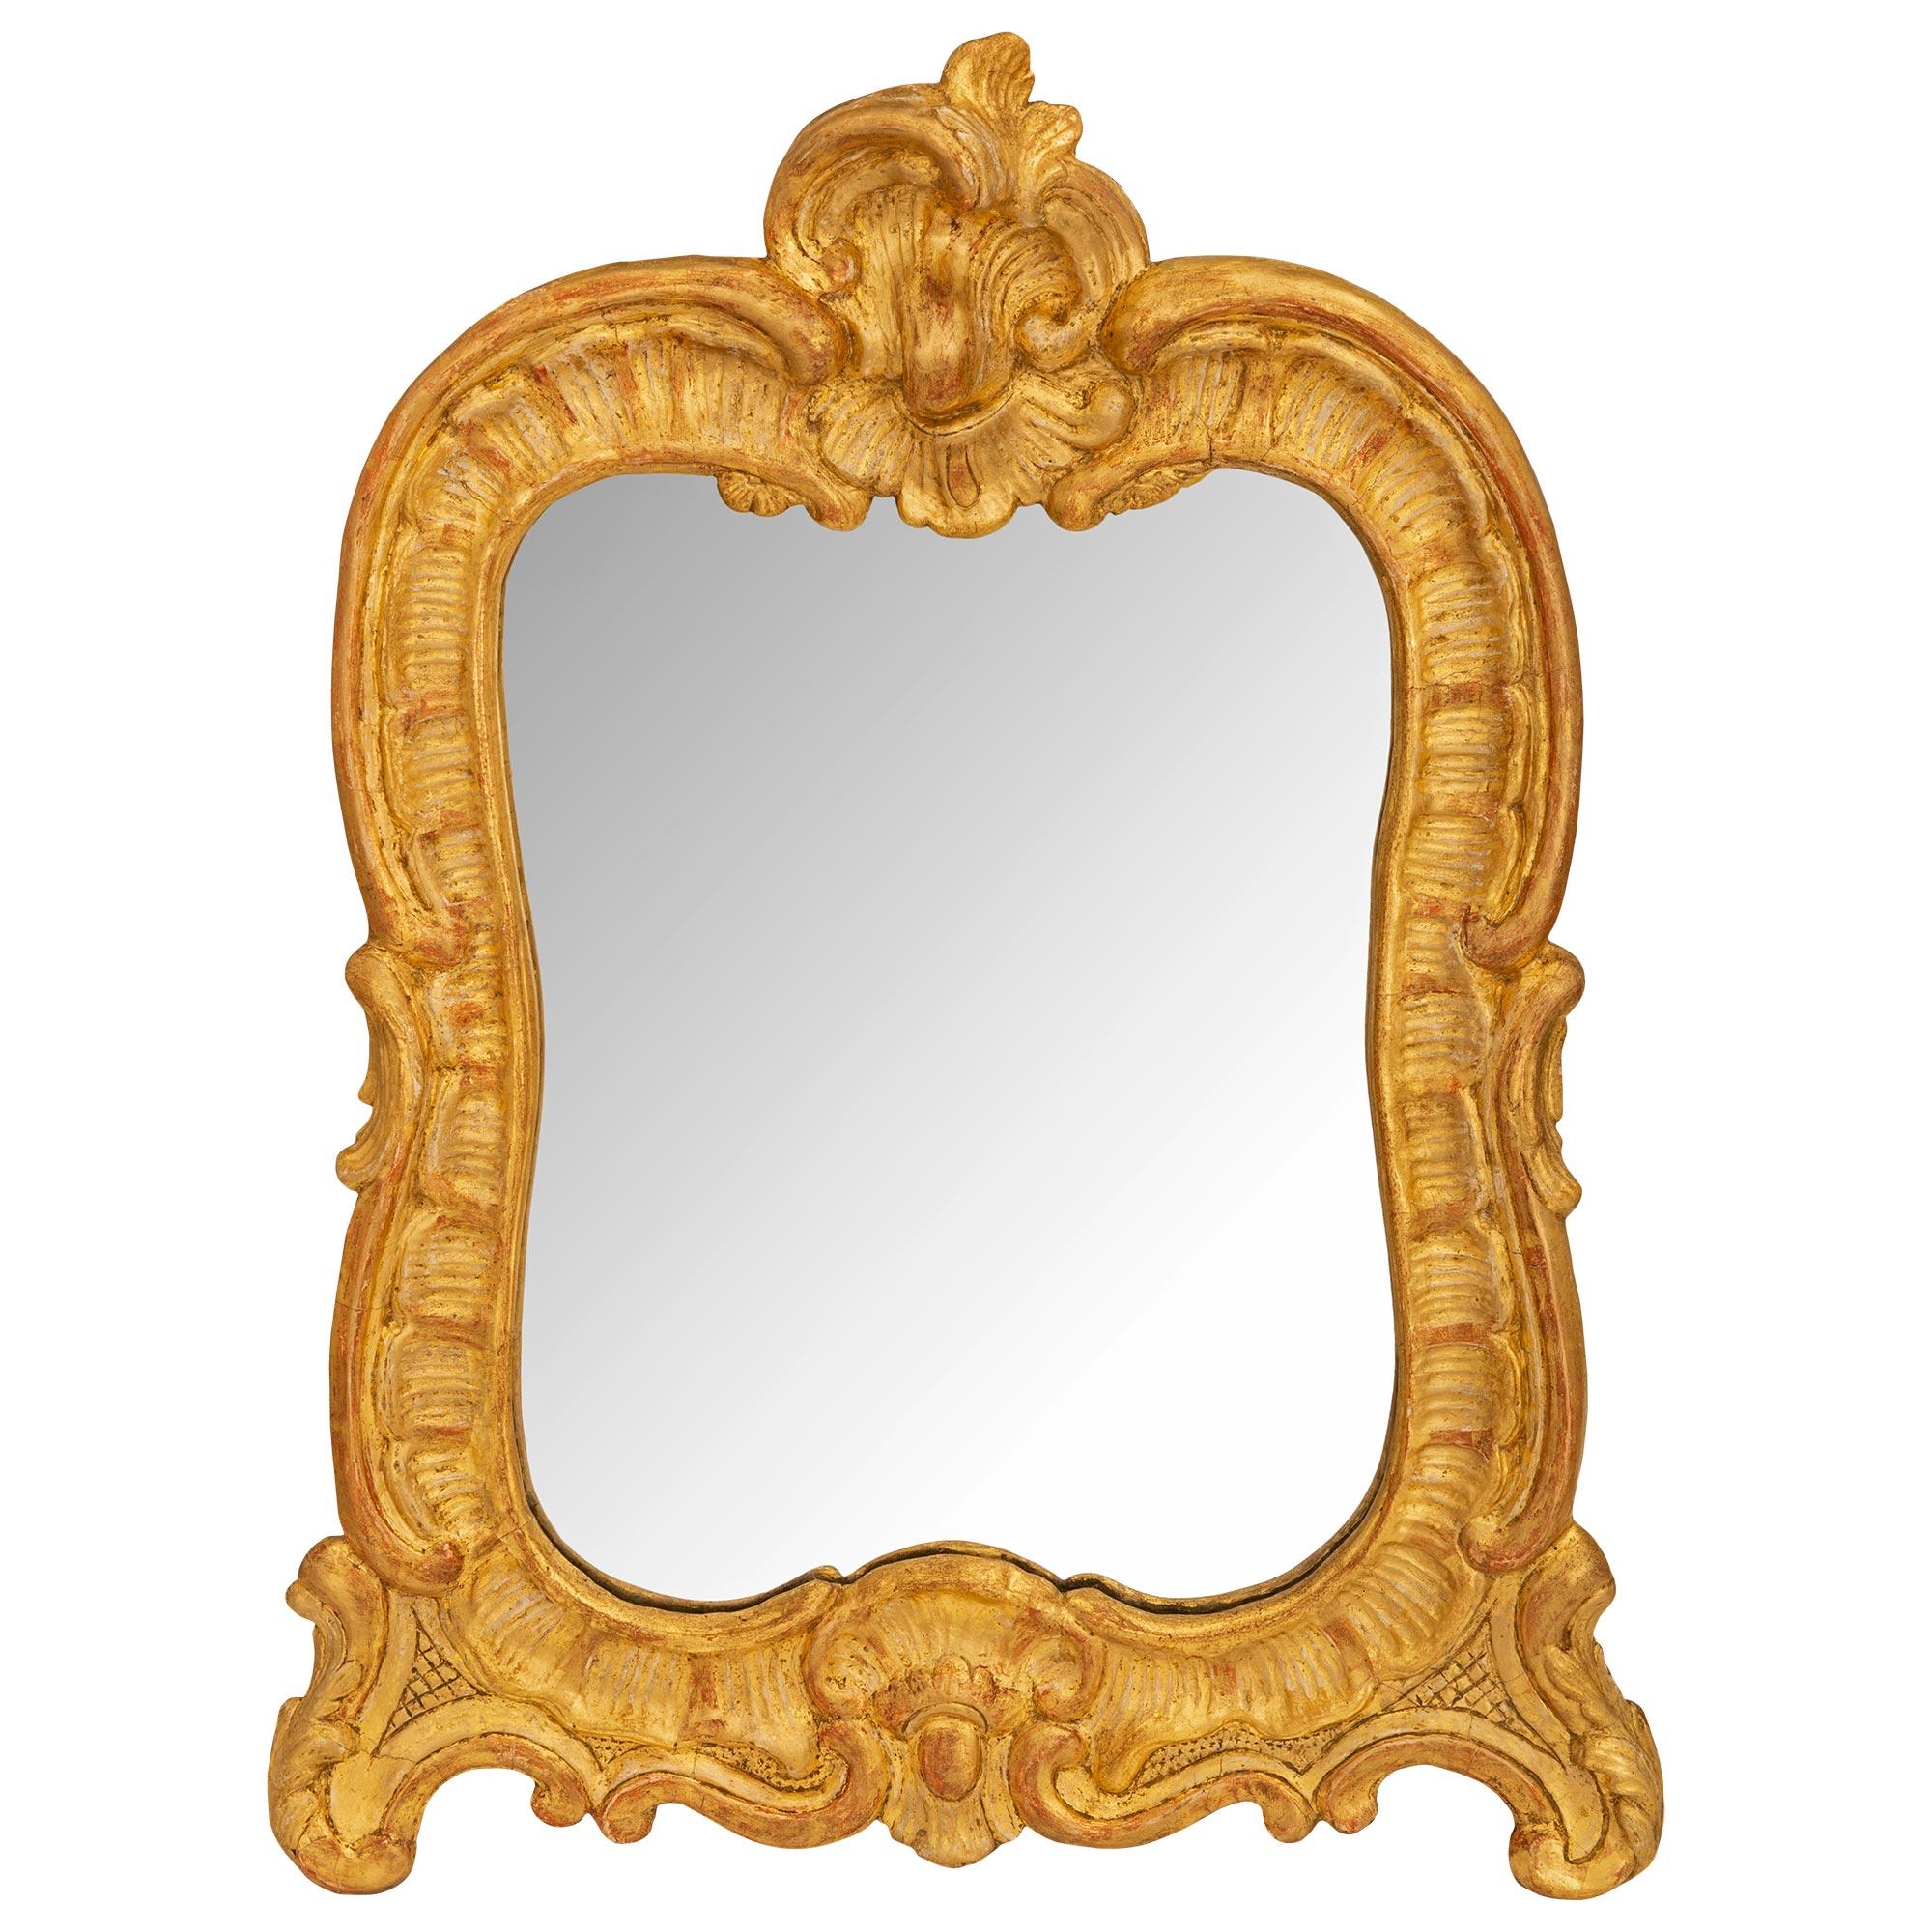 French 18th Century Louis XV Period Giltwood Vanity Mirror For Sale 3